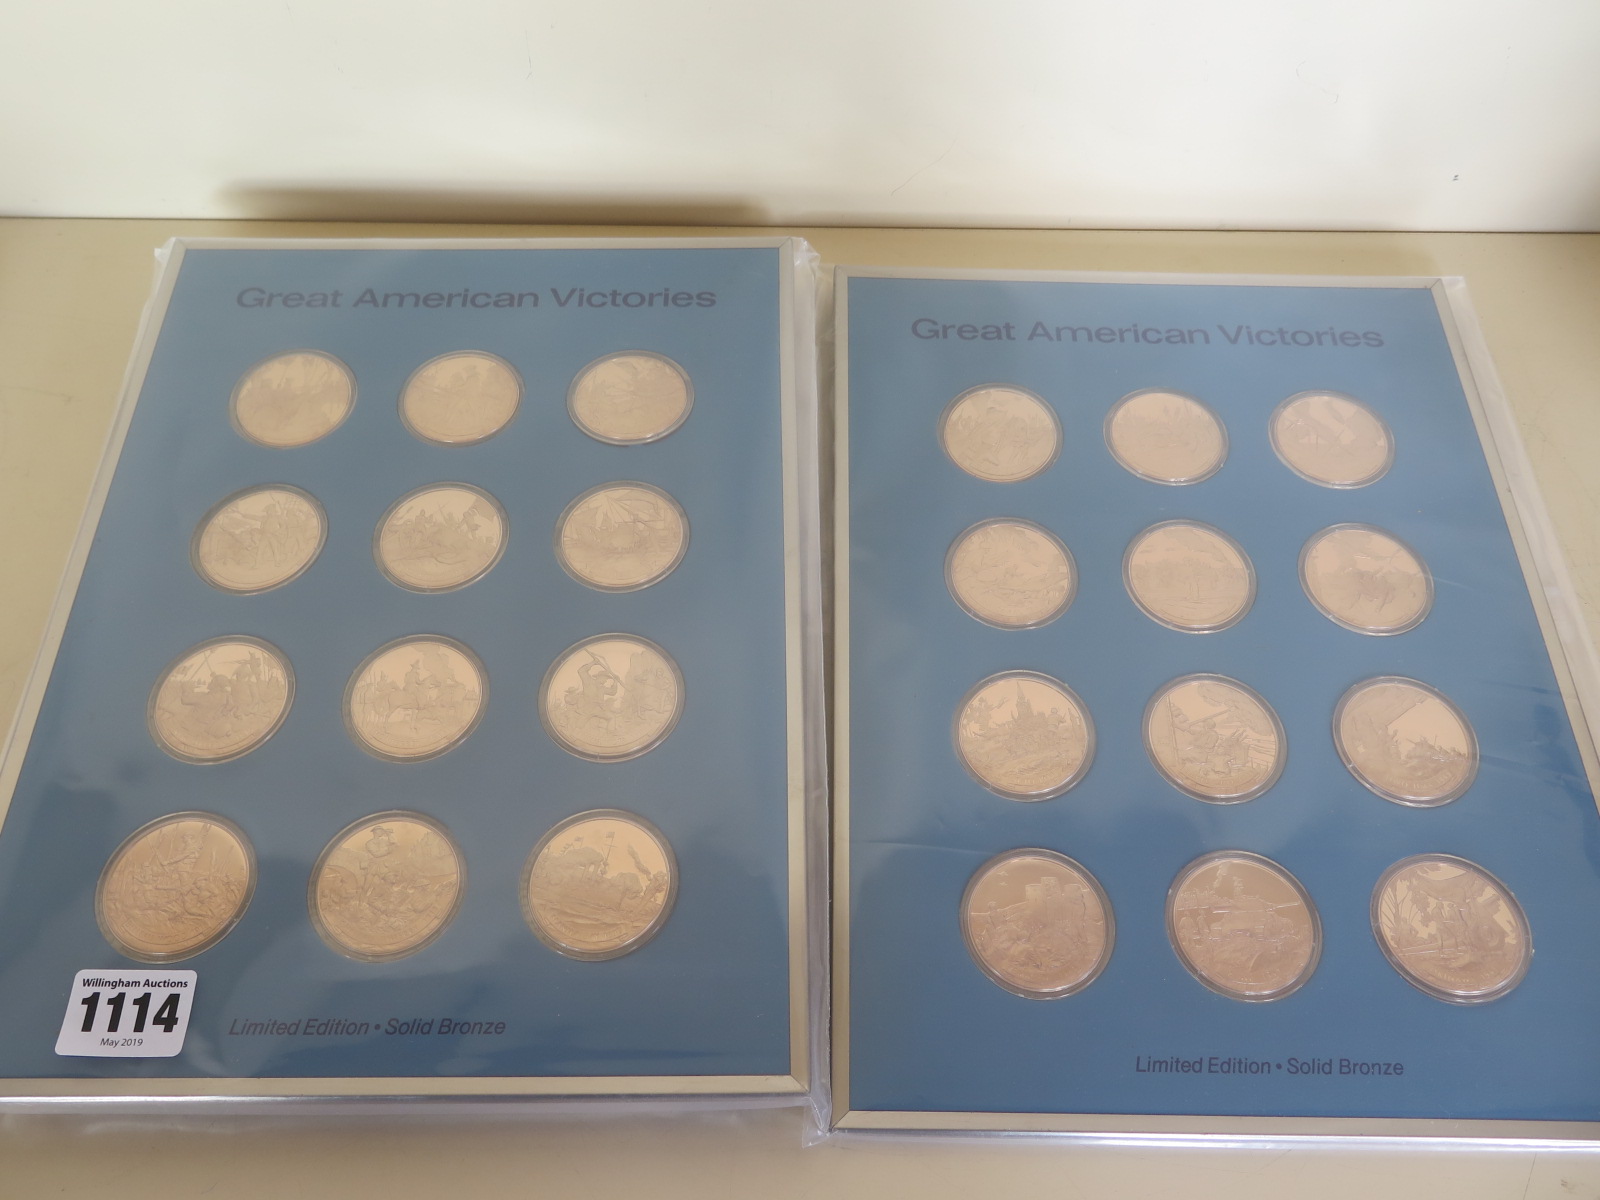 A collection of twenty-four Great American Victories bronze tokens